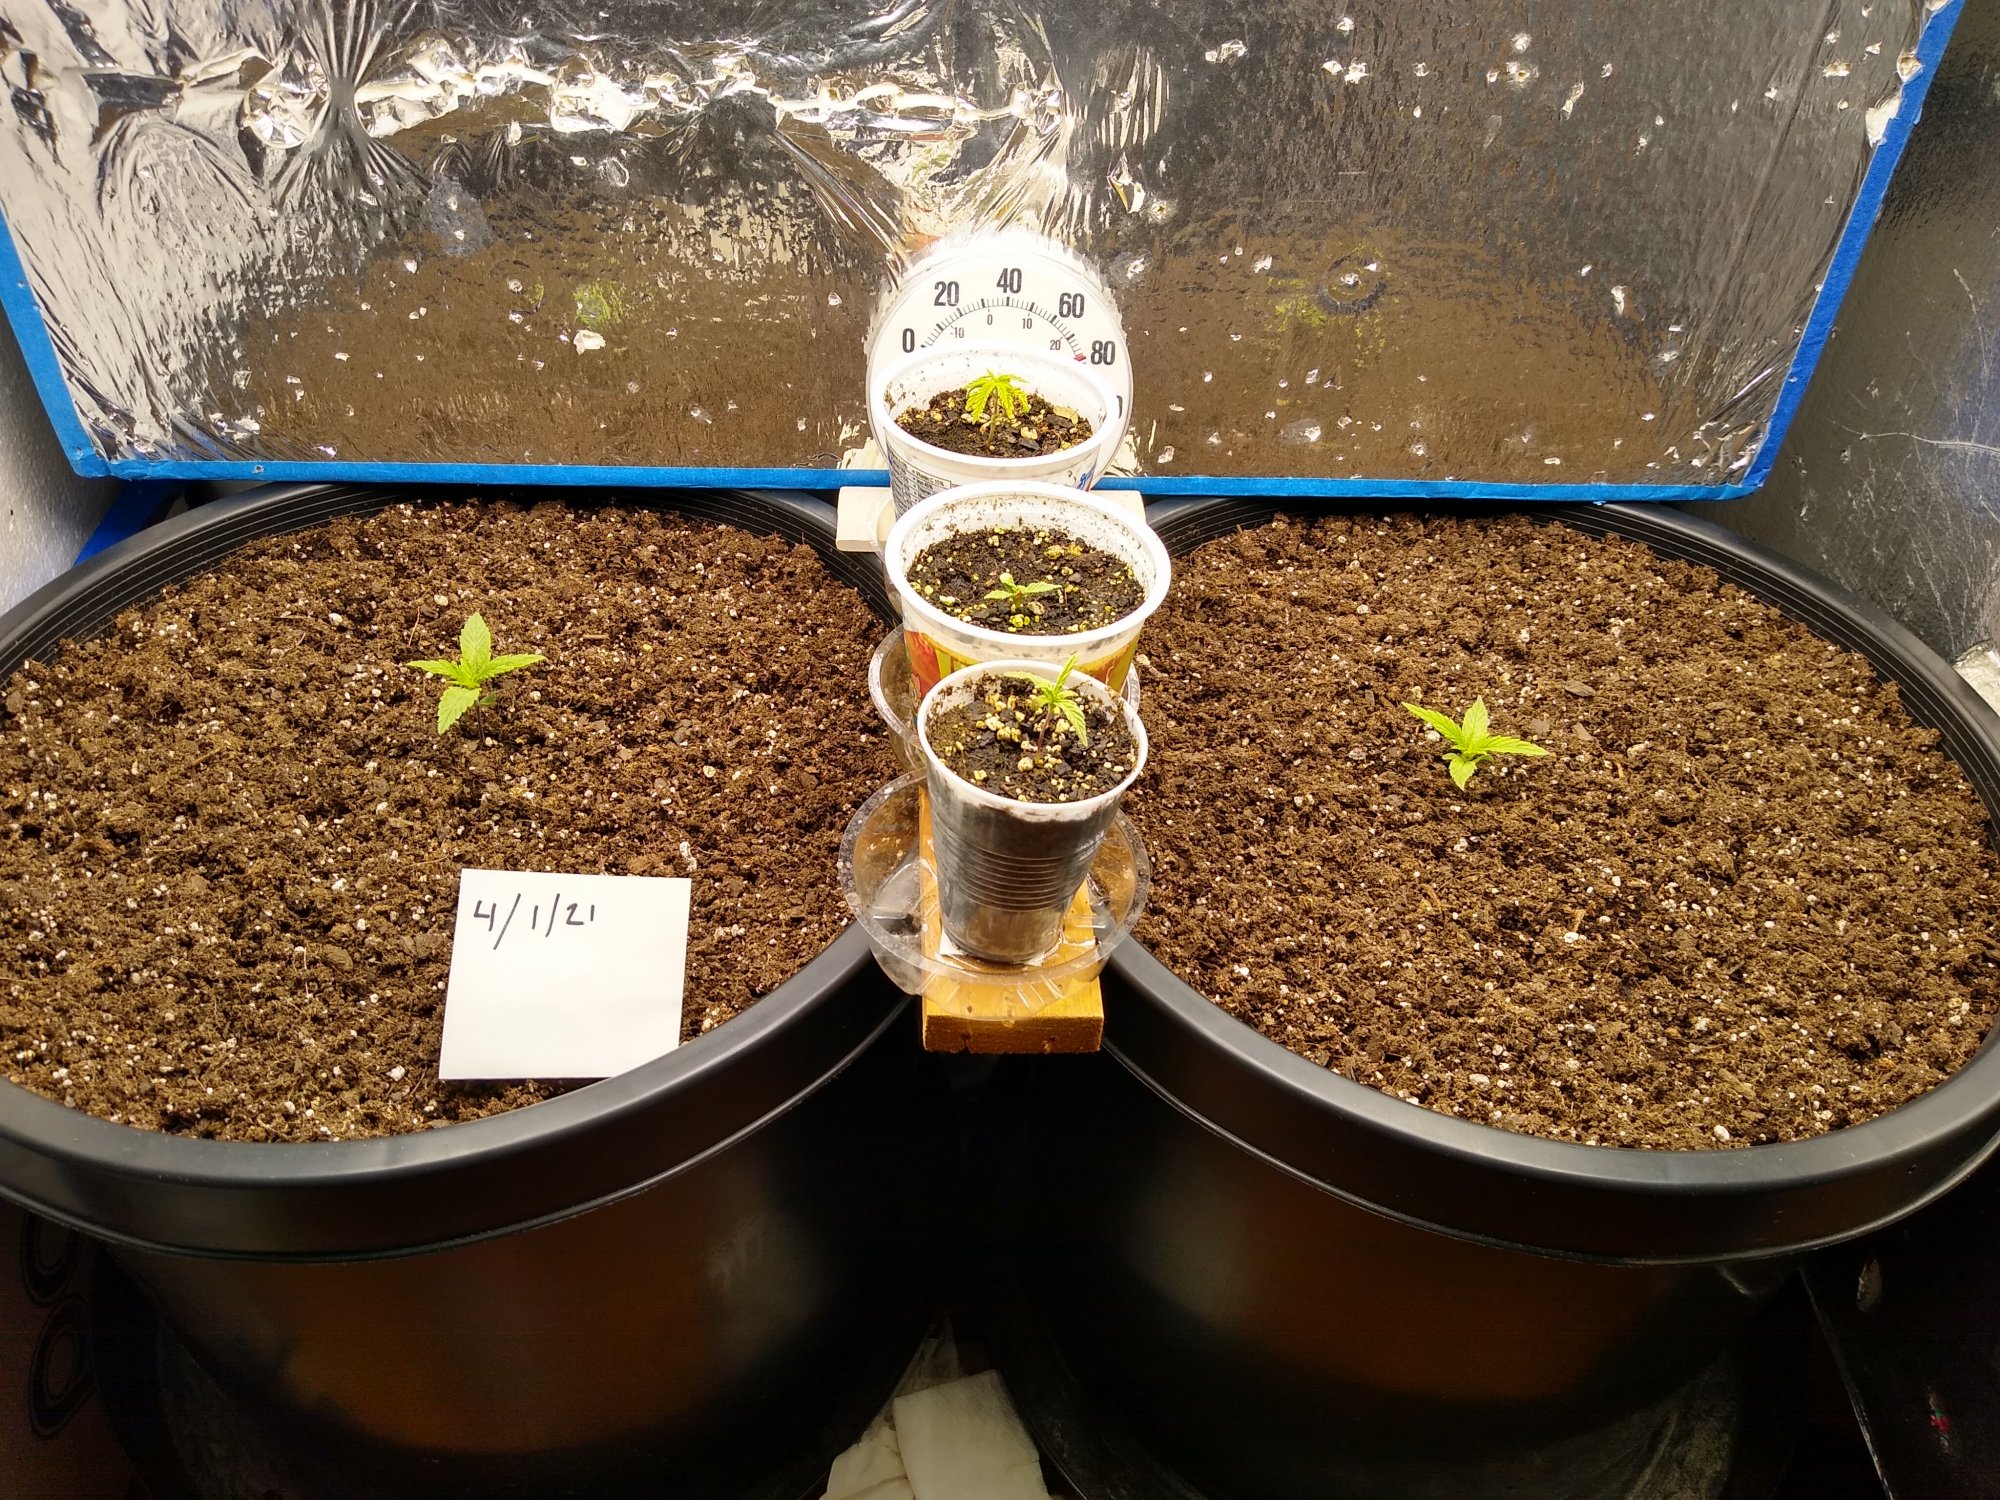 Bag seed grow well they actually  were in  a  plastic  vial